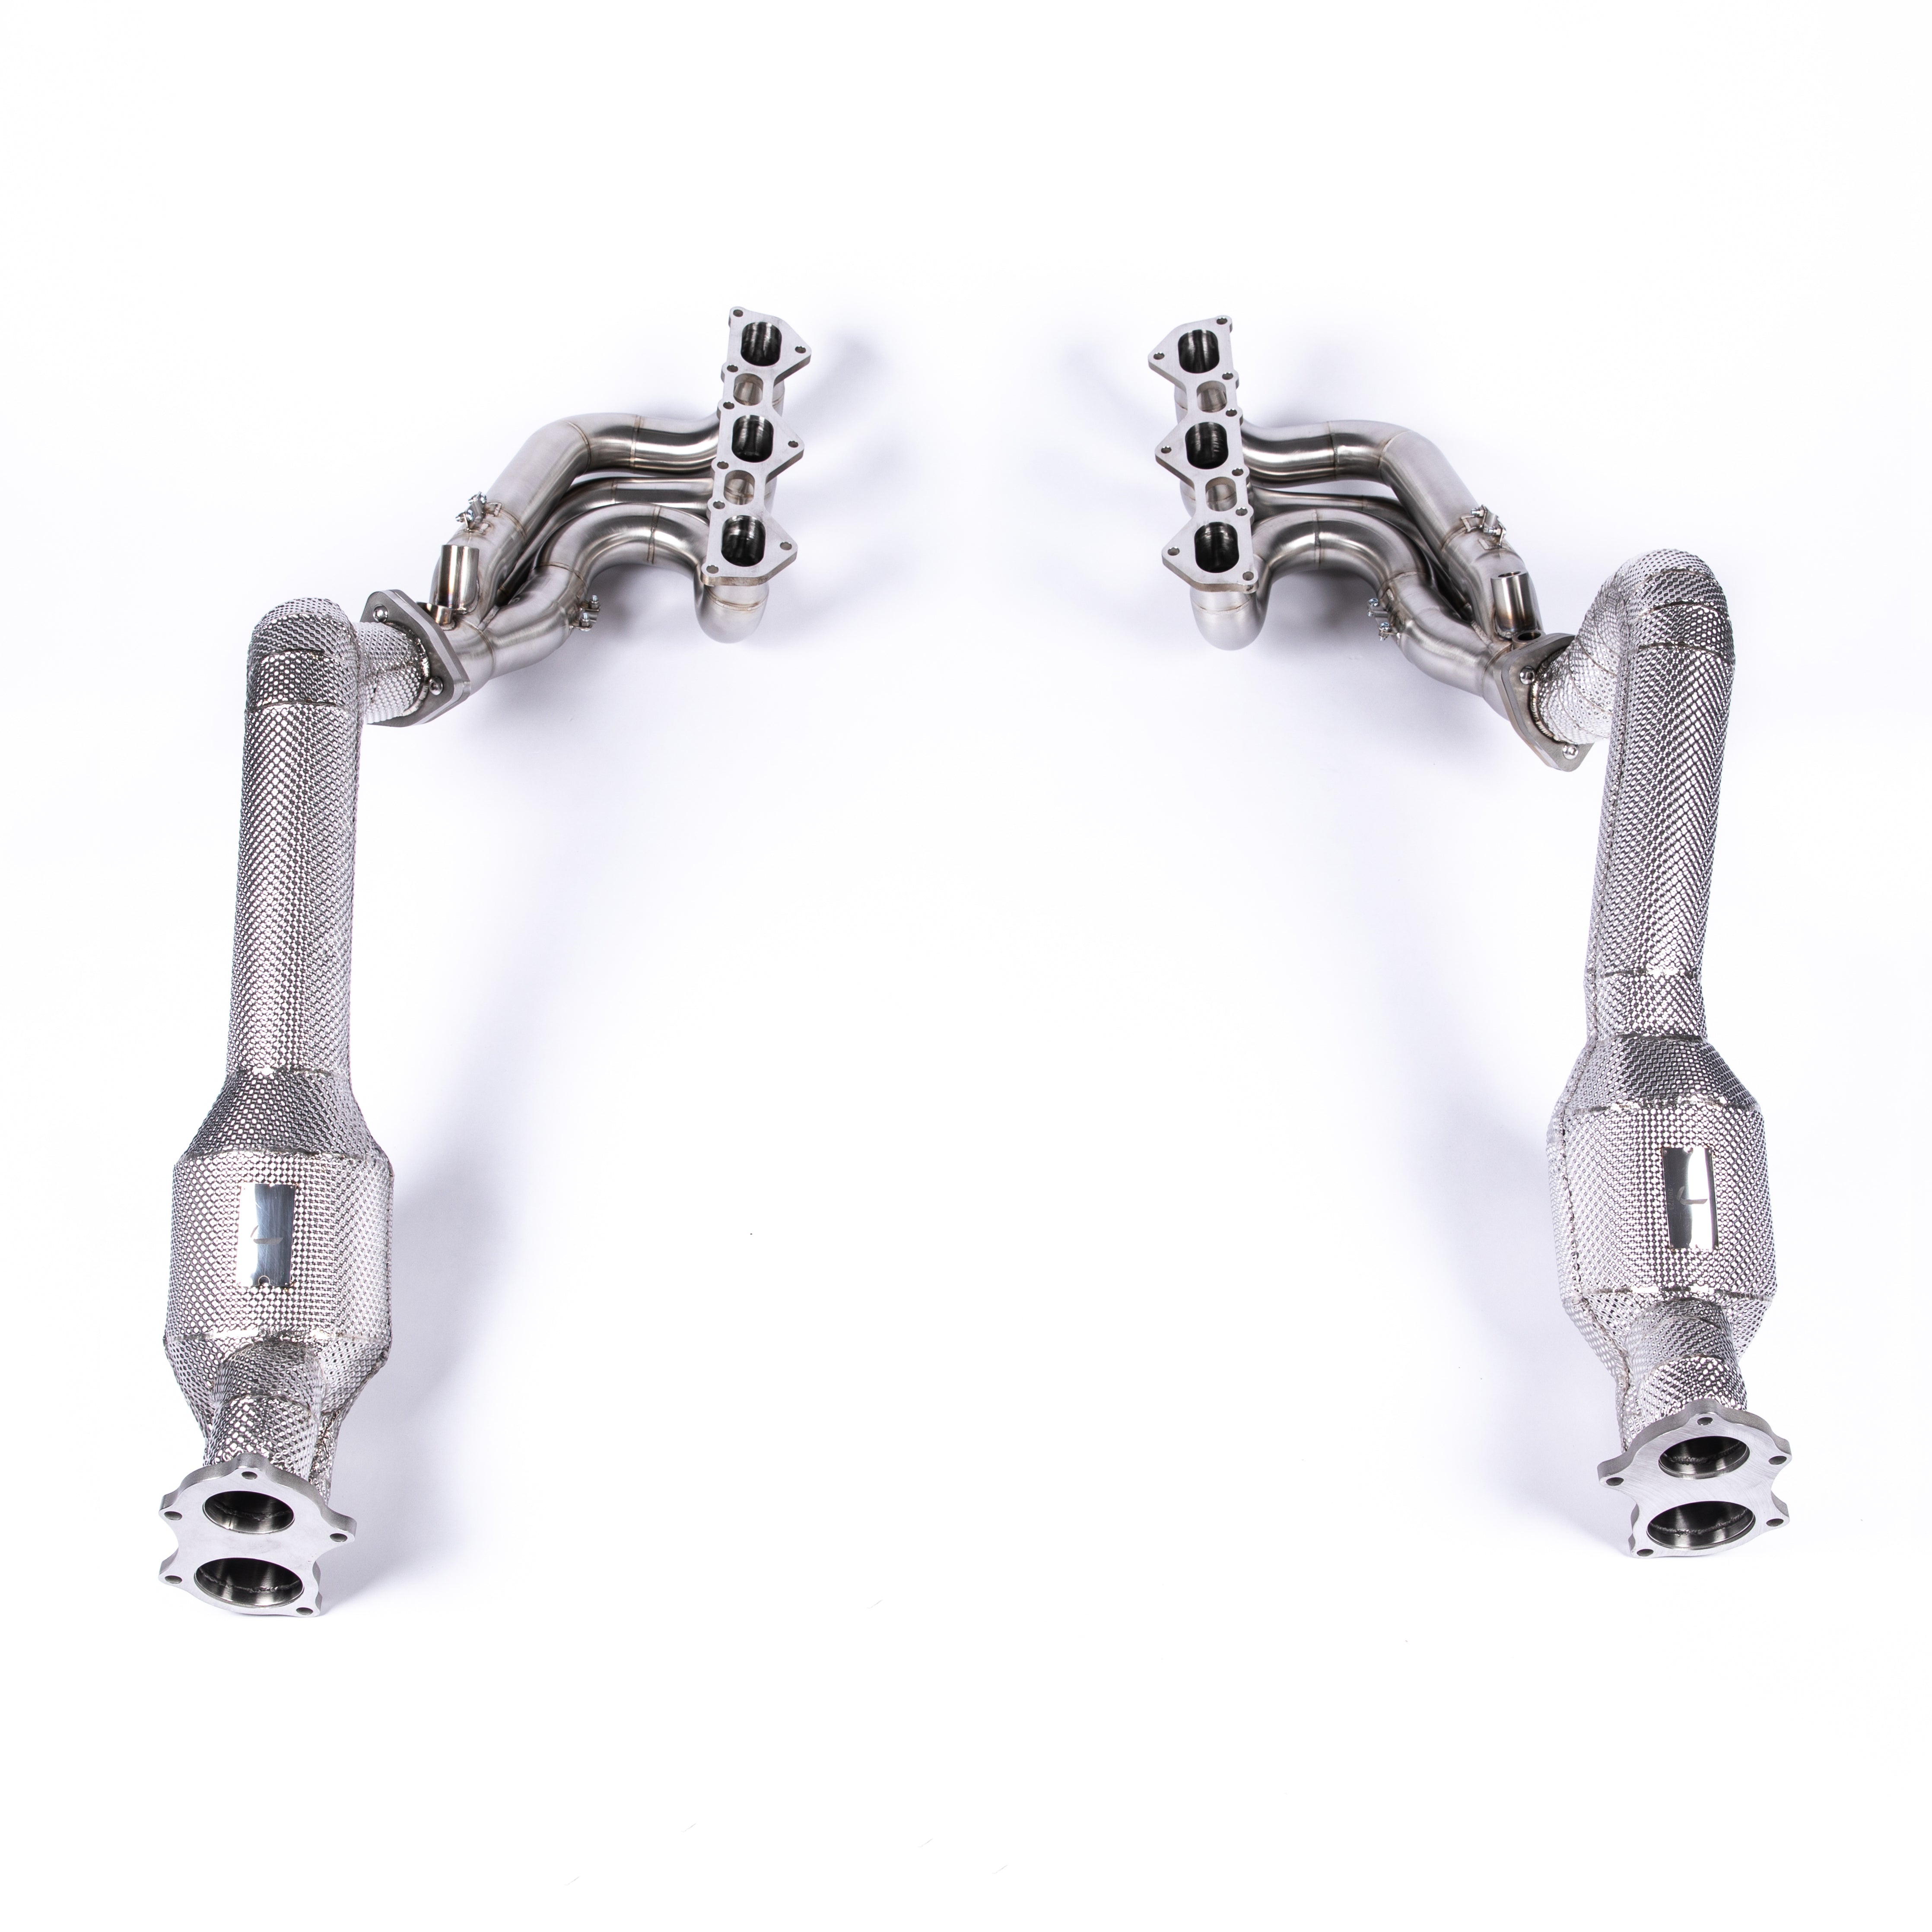 INCONEL RACE MANIFOLD &amp; LINK ROHRE (RACE CATS)